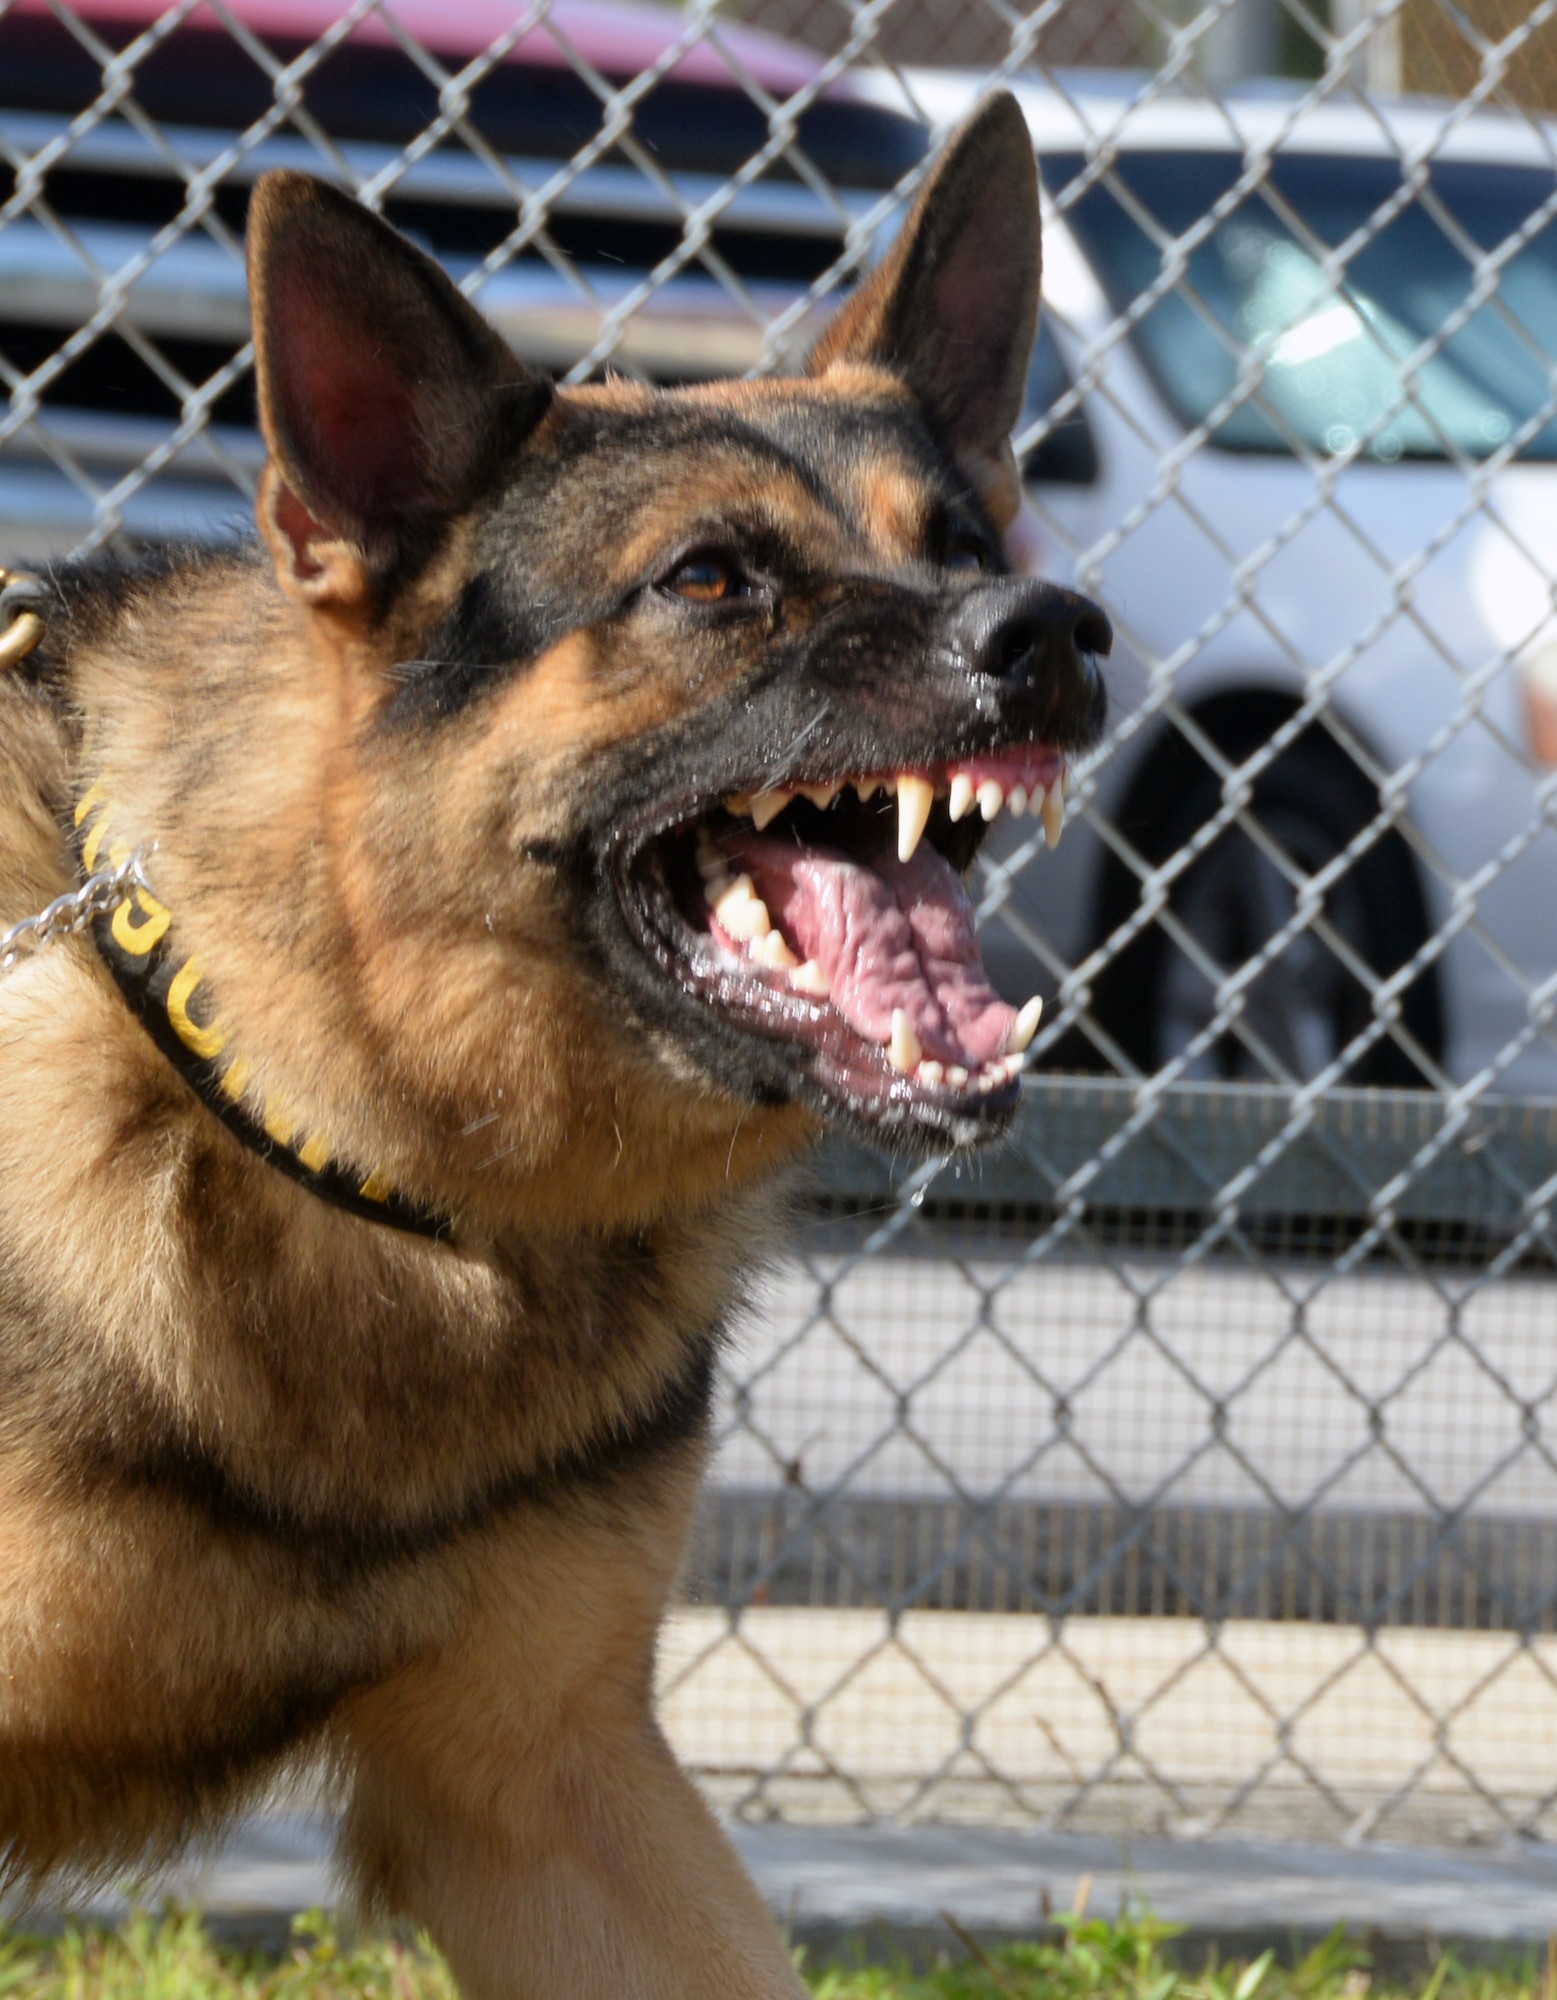 Johny, 36th Security Forces Squadron military working dog, displays aggression during back-tie work, for advanced decoy training Dec. 16, 2014, at Andersen Air Force Base, Guam. Back-tie work is a style of training that limits the dog’s area of movement to prevent injuries and also build a dog’s confidence. (U.S. Air Force photo by Senior Airman Amanda Morris/Released)